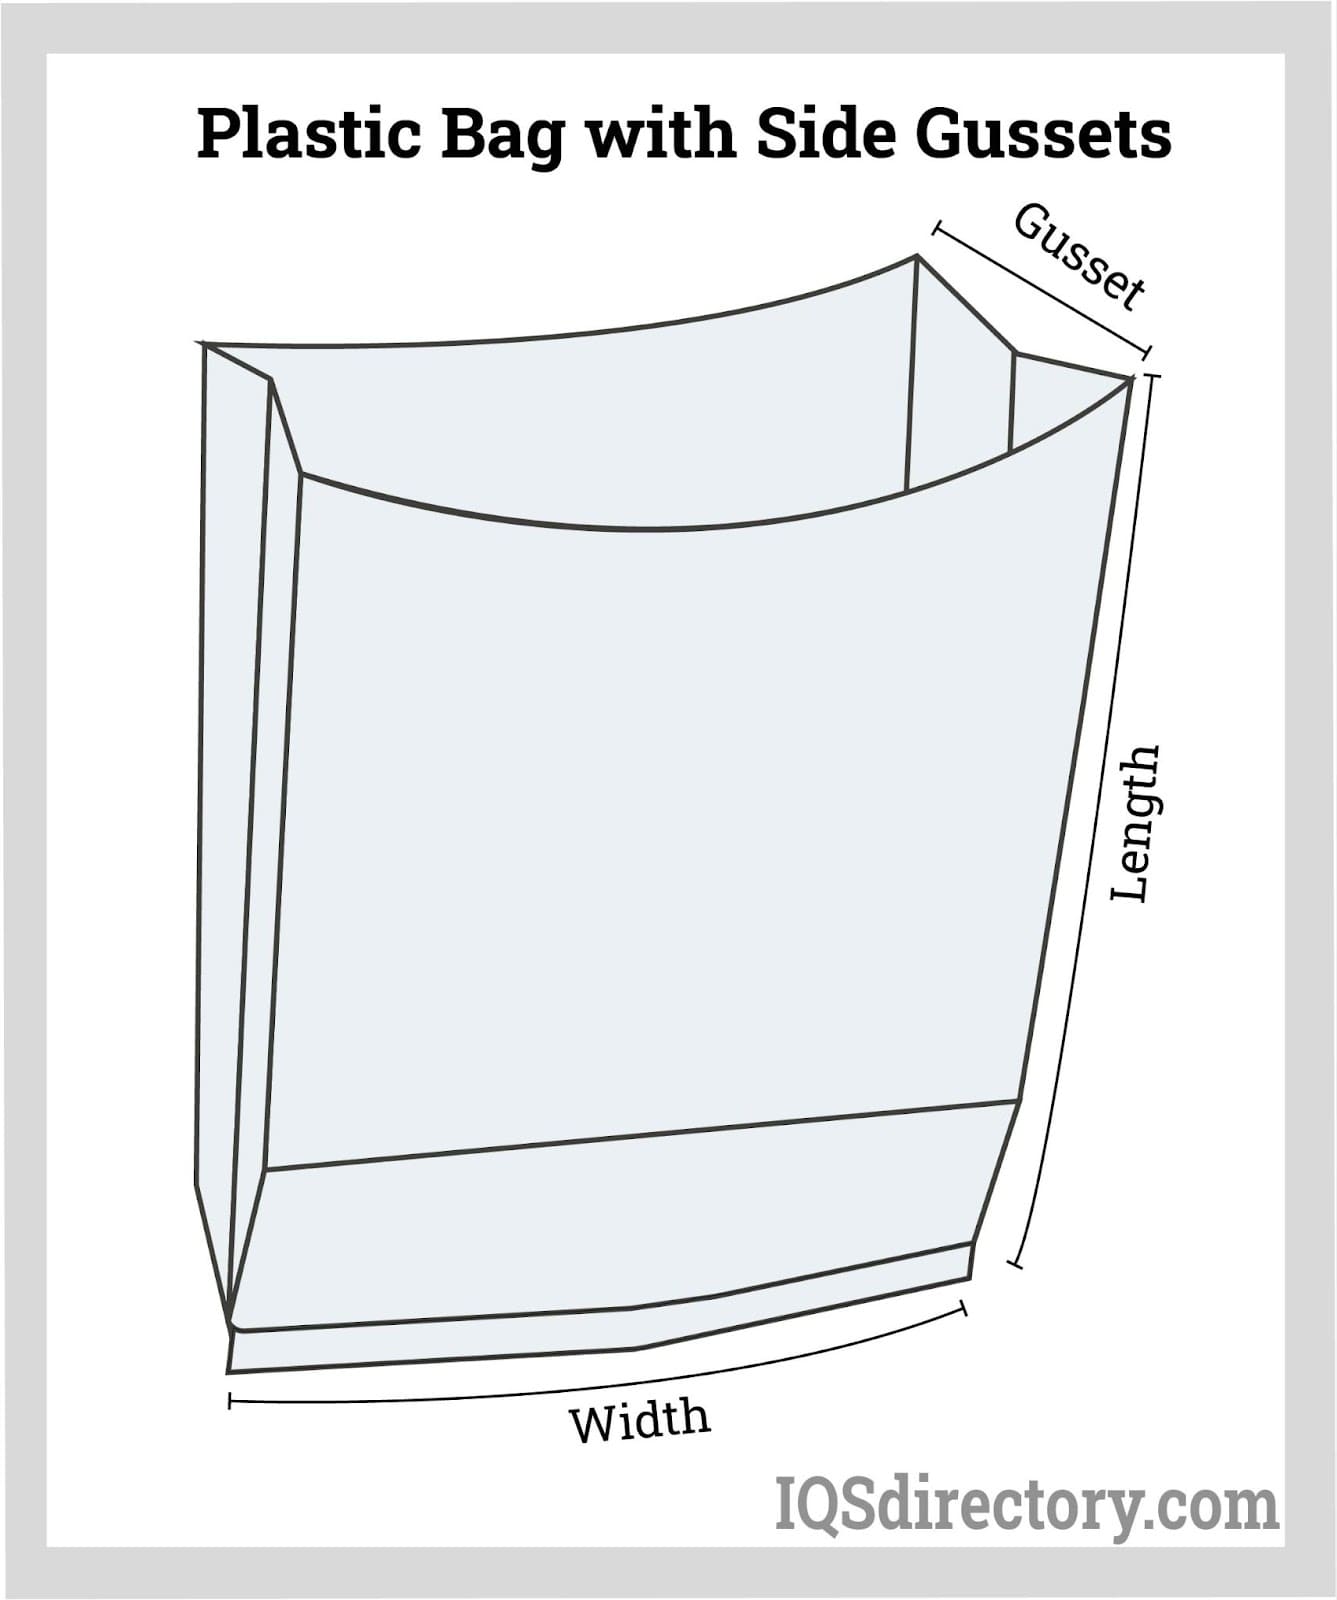 101 uses for a plastic bag | Growing Communities